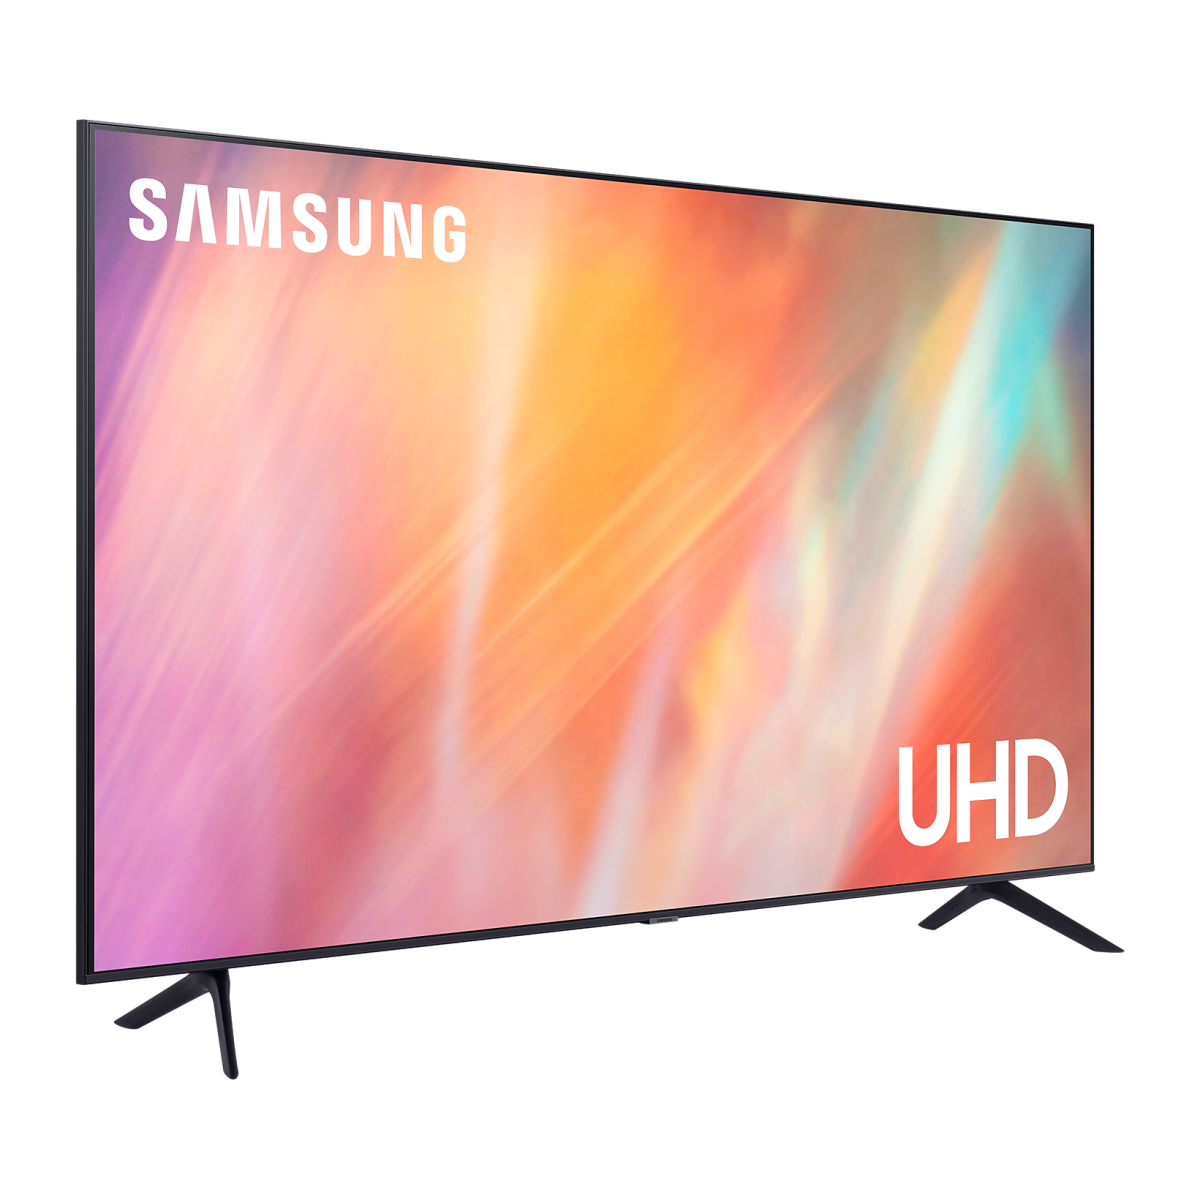 SAMSUNG 65" Crystal 4K Smart UHD TV UA65AU7700RSFS , Best TVs of Year, Top-rated TVs, TV Reviews, TV Comparison, Buying a TV Guide, TV Deals and Offers SAMSUNG 55" Crystal 4K Smart UHD TV UA55AU7500RSFS, Best TVs of Year, Top-rated TVs, TV Reviews, TV Comparison, Buying a TV Guide, TV Deals and Offers SAMSUNG 50" Crystal 4K Smart UHD TV UA50AU7700RSFS, Best TVs of Year, Top-rated TVs, TV Reviews, TV Comparison, Buying a TV Guide, TV Deals and Offers SAMSUNG 50" Crystal 4K Smart UHD TV UA50AU7500RSFS , Best TVs of Year, Top-rated TVs, TV Reviews, TV Comparison, Buying a TV Guide, TV Deals and Offers Best TVs of Year, Top-rated TVs, TV Reviews, TV Comparison, Buying a TV Guide, TV Deals and Offers Best TV in Chittagong, Best selling TV in Chittagong, Best Electronics Store in Chittagong, Meem Electronics, MeemElectronics, Best Deal of TV, SAMSUNG TV price in Bangladersh, SAMSUNG TV price in Chittagong, SAMSUNG TV price in CTG, 65 Inch TV, SAMSUNG TV, 01919382008, 01919382009, 019193820010 SAMSUNG 55" Crystal 4K Smart UHD TV UA55AU7700RSFS , Best TVs of Year, Top-rated TVs, TV Reviews, TV Comparison, Buying a TV Guide, TV Deals and Offers Best TV in Chittagong, Best selling TV in Chittagong, Best Electronics Store in Chittagong, Meem Electronics, MeemElectronics, Best Deal of TV, SAMSUNG TV price in Bangladersh, SAMSUNG TV price in Chittagong, SAMSUNG TV price in CTG, 55 Inch TV, SAMSUNG TV, 01919382008, 01919382009, 019193820010 SAMSUNG 55" Crystal 4K Smart UHD TV UA55AU7500RSFS , Best TVs of Year, Top-rated TVs, TV Reviews, TV Comparison, Buying a TV Guide, TV Deals and Offers Best TV in Chittagong, Best selling TV in Chittagong, Best Electronics Store in Chittagong, Meem Electronics, MeemElectronics, Best Deal of TV, SAMSUNG TV price in Bangladersh, SAMSUNG TV price in Chittagong, SAMSUNG TV price in CTG, 55 Inch TV, SAMSUNG TV, 01919382008, 01919382009, 019193820010 SAMSUNG 50" Crystal 4K Smart UHD TV UA50AU7700RSFS , Best TVs of Year, Top-rated TVs, TV Reviews, TV Comparison, Buying a TV Guide, TV Deals and Offers Best TV in Chittagong, Best selling TV in Chittagong, Best Electronics Store in Chittagong, Meem Electronics, MeemElectronics, Best Deal of TV, SAMSUNG TV price in Bangladersh, SAMSUNG TV price in Chittagong, SAMSUNG TV price in CTG, 50 Inch TV, SAMSUNG TV, 01919382008, 01919382009, 019193820010 SAMSUNG 50" Crystal 4K Smart UHD TV UA50AU7500RSFS , Best TVs of Year, Top-rated TVs, TV Reviews, TV Comparison, Buying a TV Guide, TV Deals and Offers Best TV in Chittagong, Best selling TV in Chittagong, Best Electronics Store in Chittagong, Meem Electronics, MeemElectronics, Best Deal of TV, SAMSUNG TV price in Bangladersh, SAMSUNG TV price in Chittagong, SAMSUNG TV price in CTG, 50 Inch TV, SAMSUNG TV, 01919382008, 01919382009, 019193820010 SAMSUNG 43" Crystal 4K Smart UHD TV UA43AU7700RSFS , Best TVs of Year, Top-rated TVs, TV Reviews, TV Comparison, Buying a TV Guide, TV Deals and Offers Best TV in Chittagong, Best selling TV in Chittagong, Best Electronics Store in Chittagong, Meem Electronics, MeemElectronics, Best Deal of TV, SAMSUNG TV price in Bangladersh, SAMSUNG TV price in Chittagong, SAMSUNG TV price in CTG, 43 Inch TV, SAMSUNG TV, 01919382008, 01919382009, 019193820010 SAMSUNG 43" Crystal 4K Smart UHD TV UA43AU7500RSFS, Best TVs of Year, Top-rated TVs, TV Reviews, TV Comparison, Buying a TV Guide, TV Deals and Offers Best TV in Chittagong, Best selling TV in Chittagong, Best Electronics Store in Chittagong, Meem Electronics, MeemElectronics, Best Deal of TV, SAMSUNG TV price in Bangladersh, SAMSUNG TV price in Chittagong, SAMSUNG TV price in CTG, 43 Inch TV, SAMSUNG TV, 01919382008, 01919382009, 019193820010